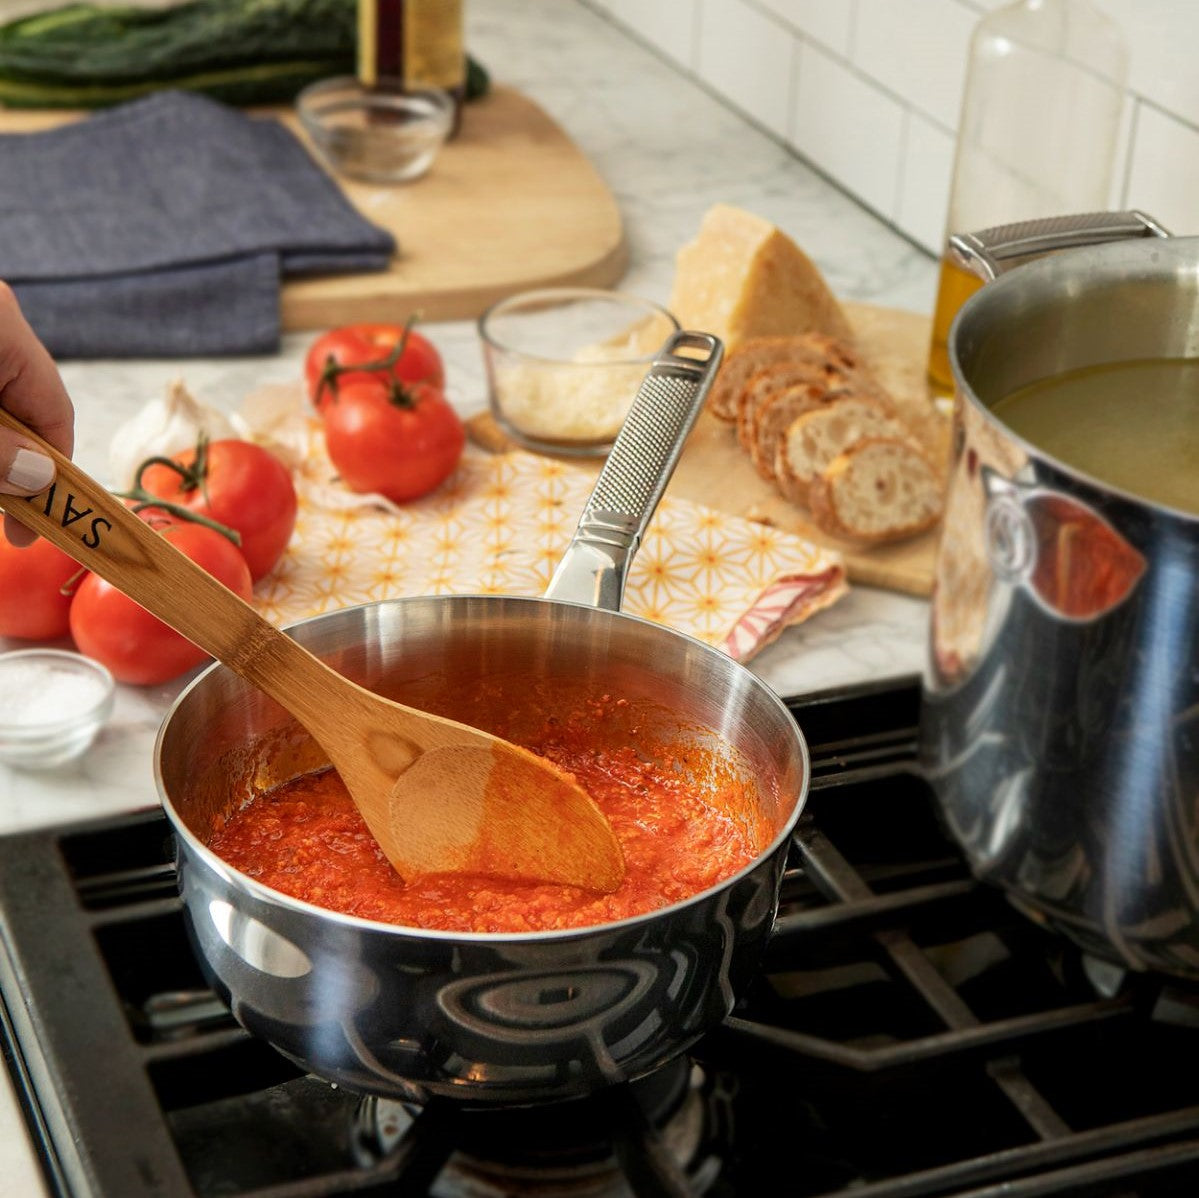 SAVEUR Selects Voyage Tri-Ply Saucepan with Insulated Lid